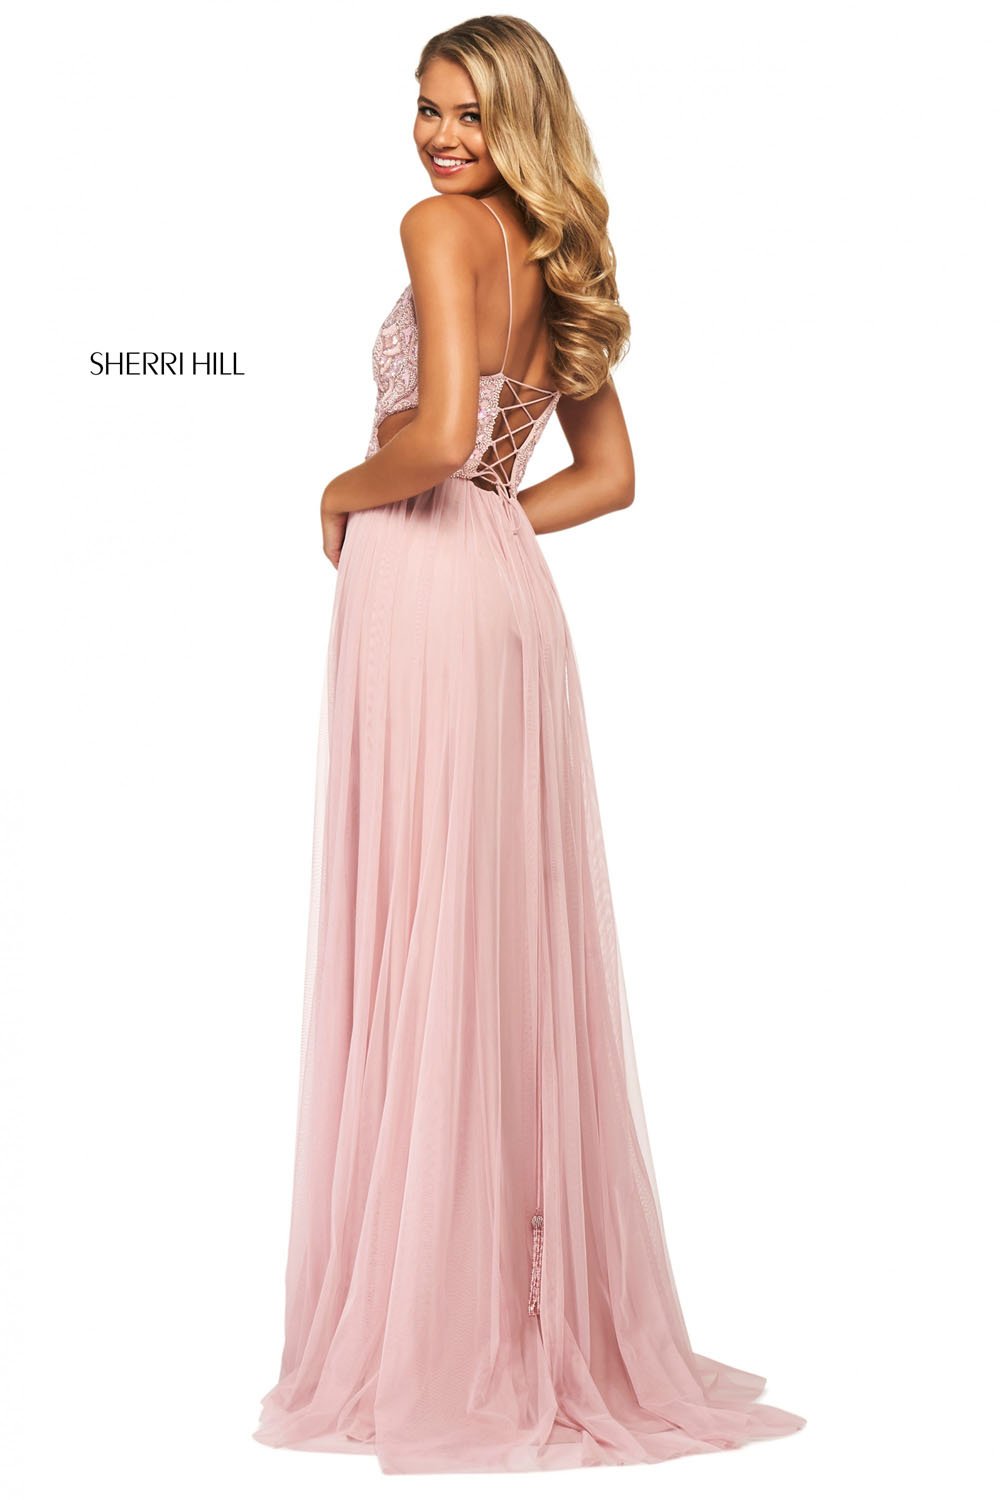 Sherri Hill 53557 dress images in these colors: Black Multi, Light Pink.